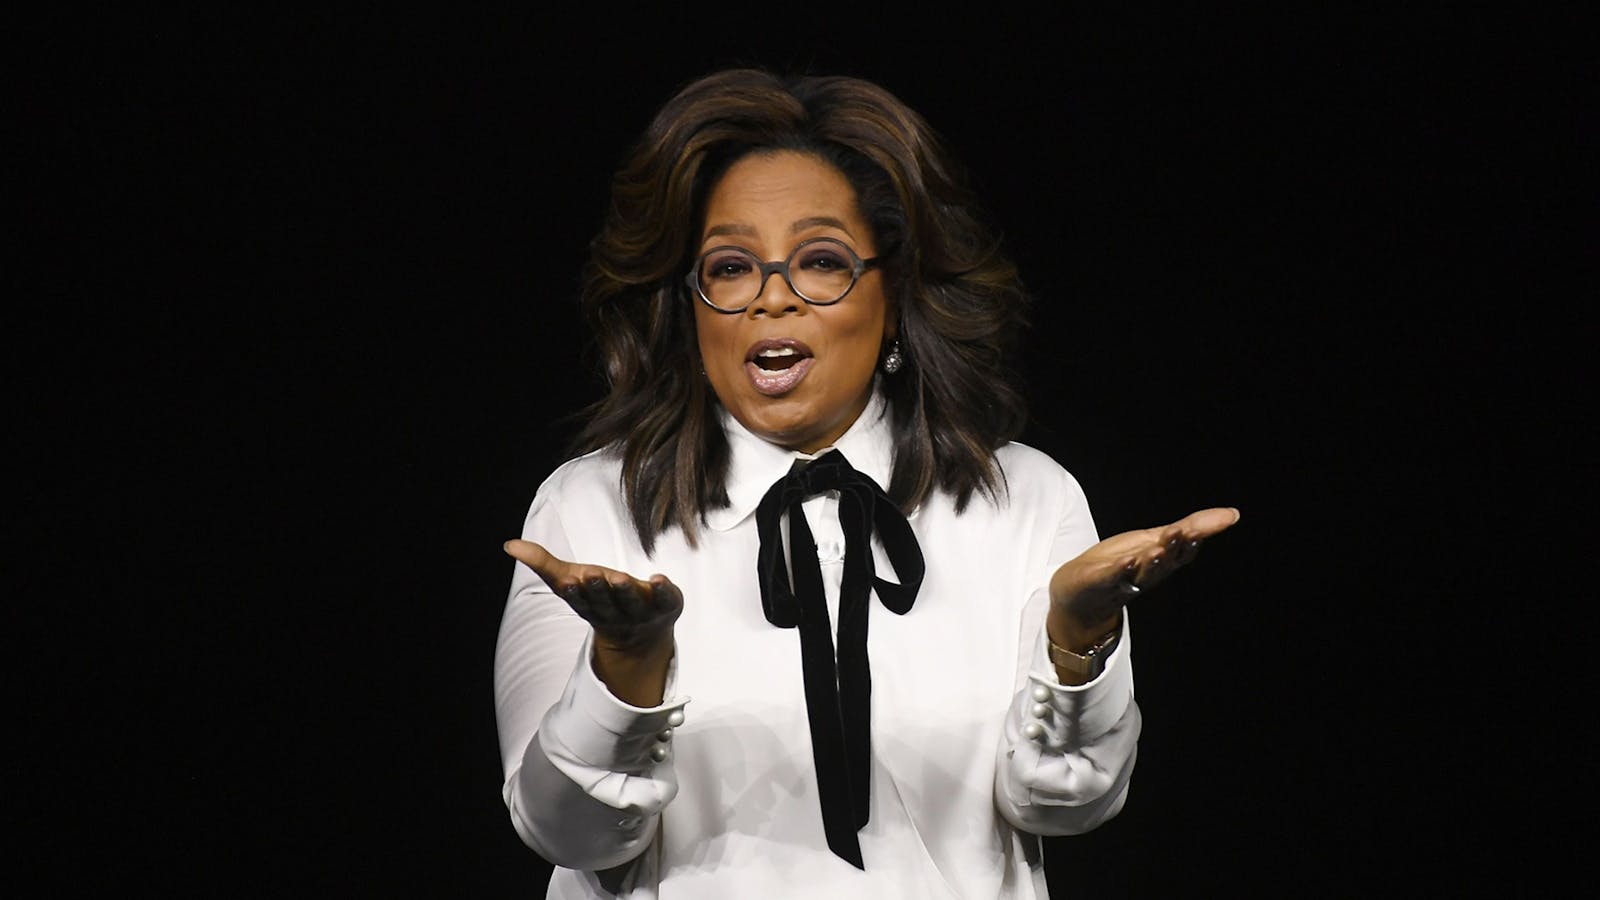 Elon Musk considered Oprah Winfrey for Twitter's board, messages show. Photo by Bloomberg.